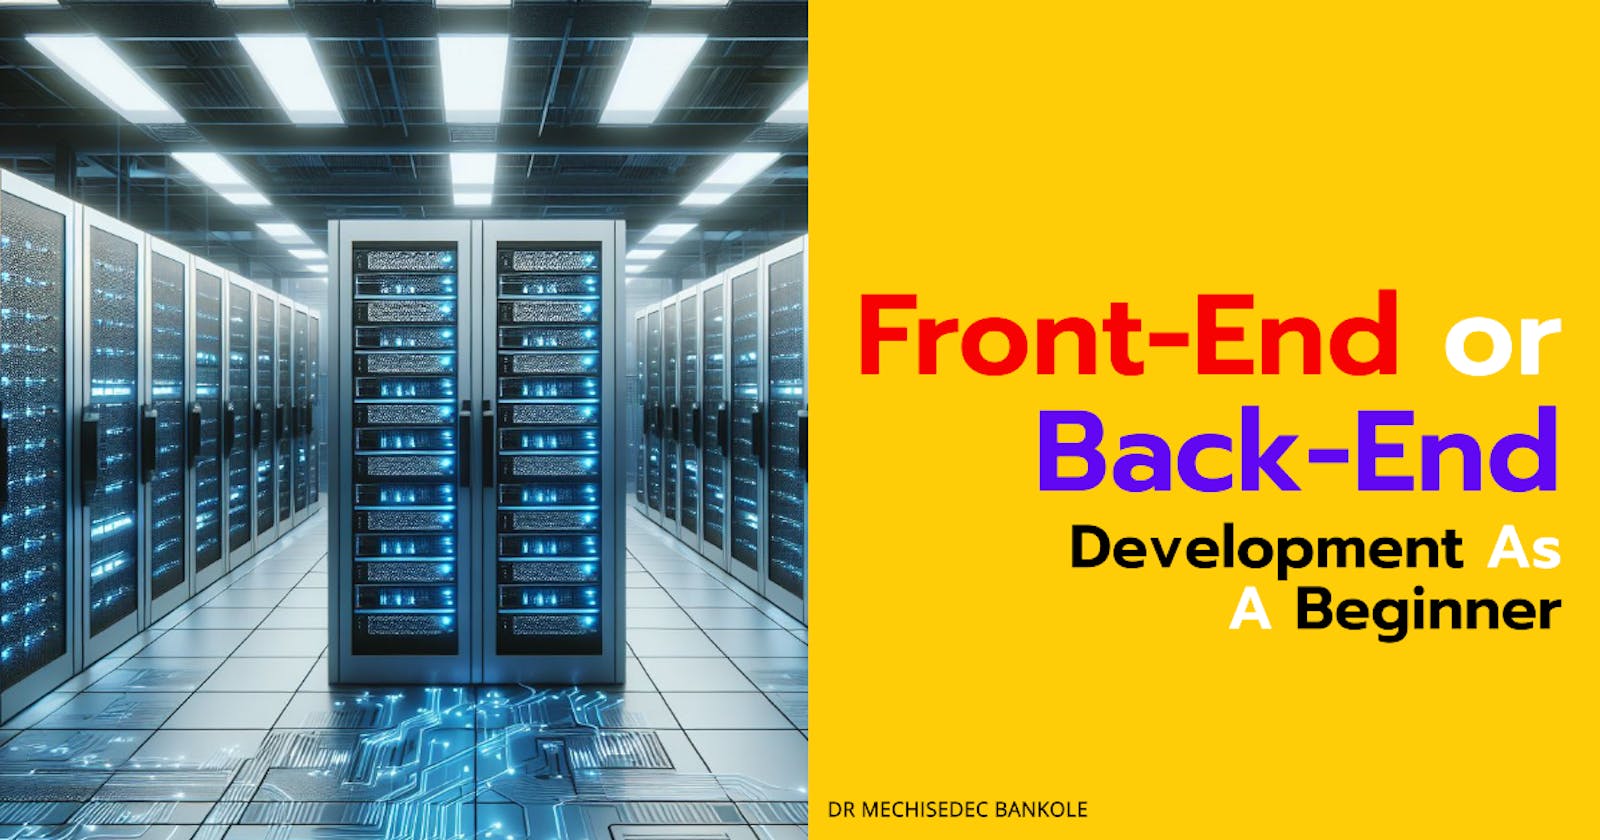 Front-End or Back-End Development As A Beginner